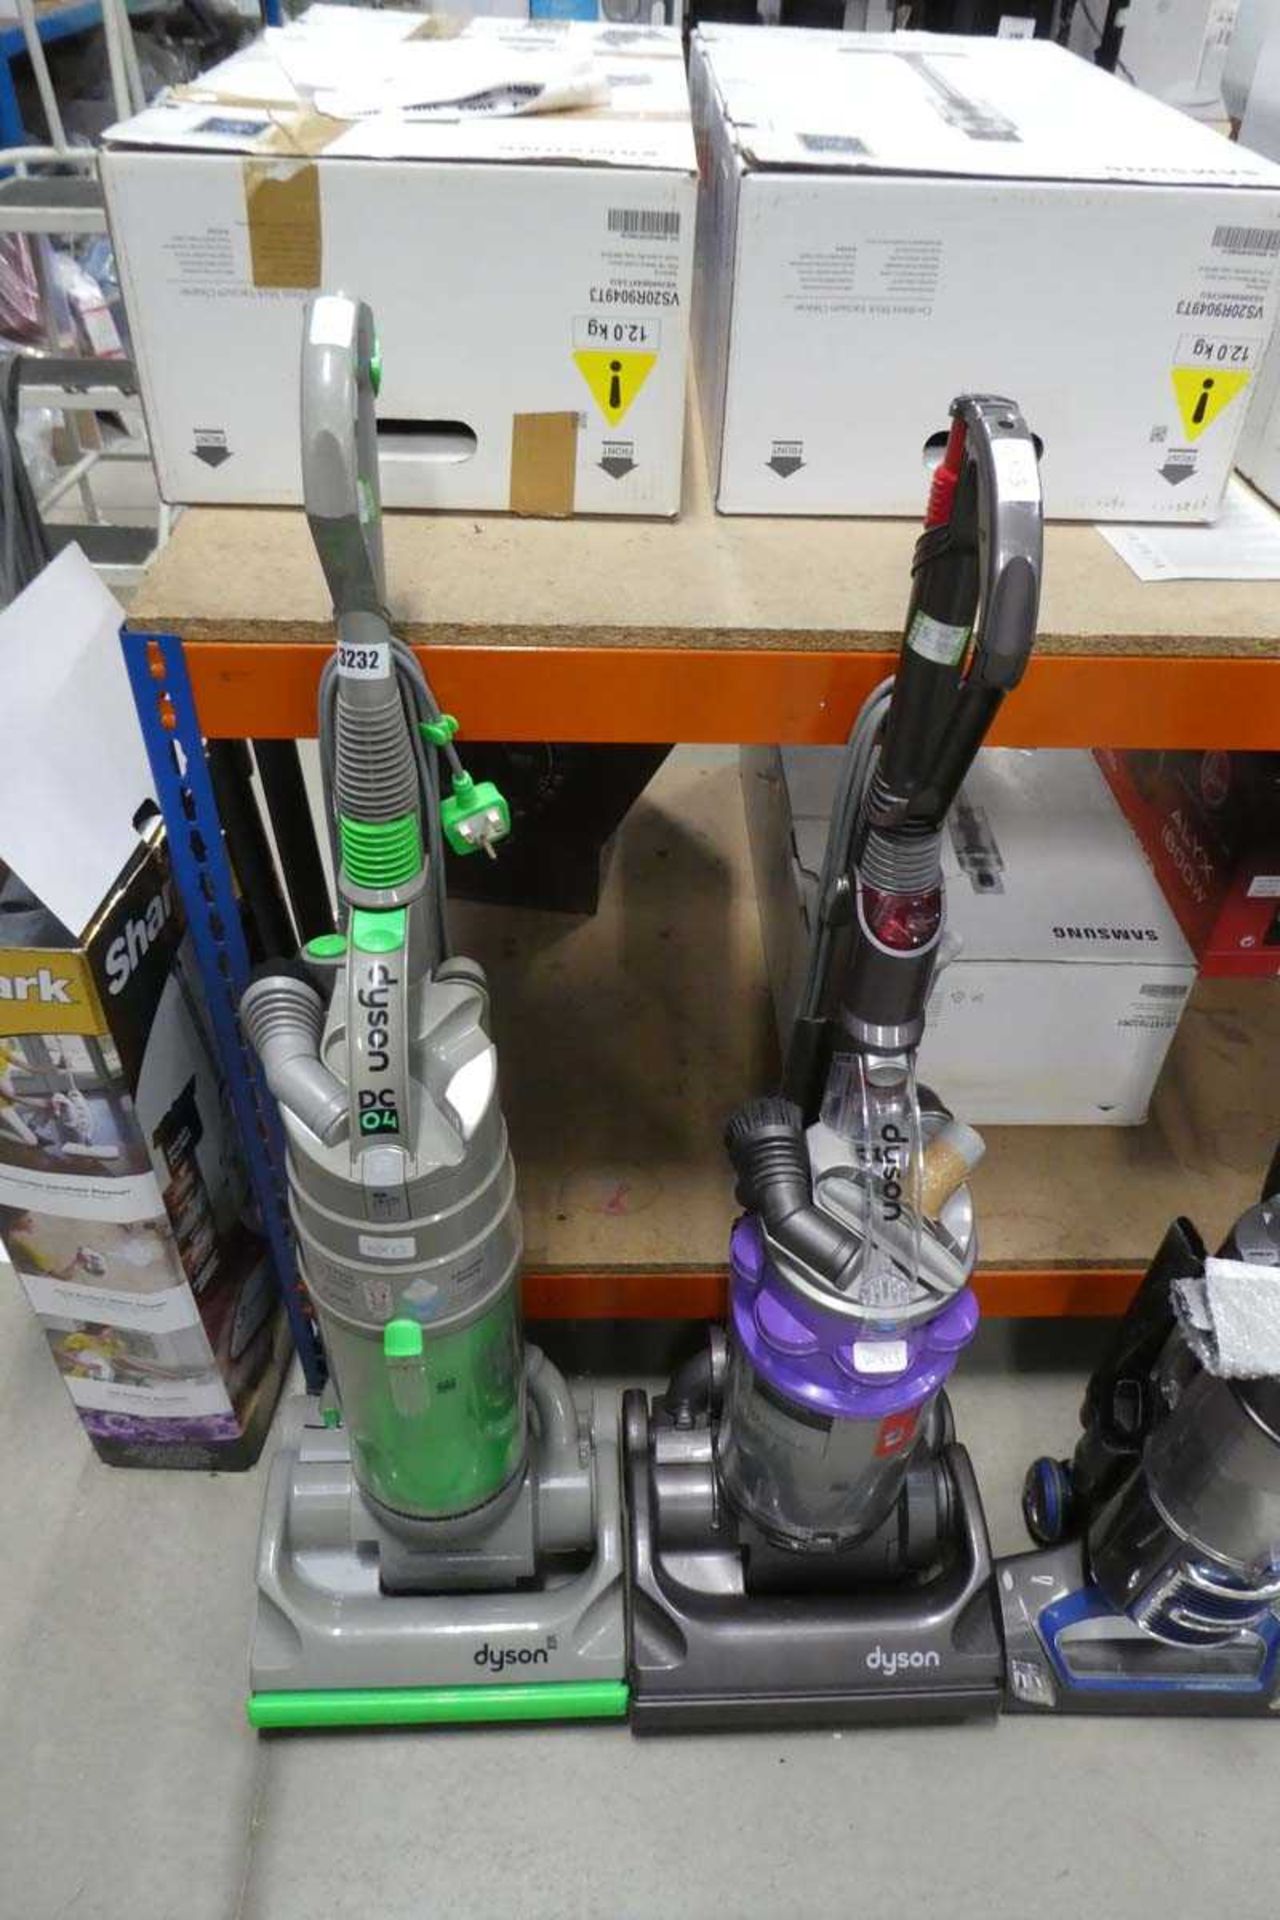 2 upright Dyson DC04 and DC14 vacuums